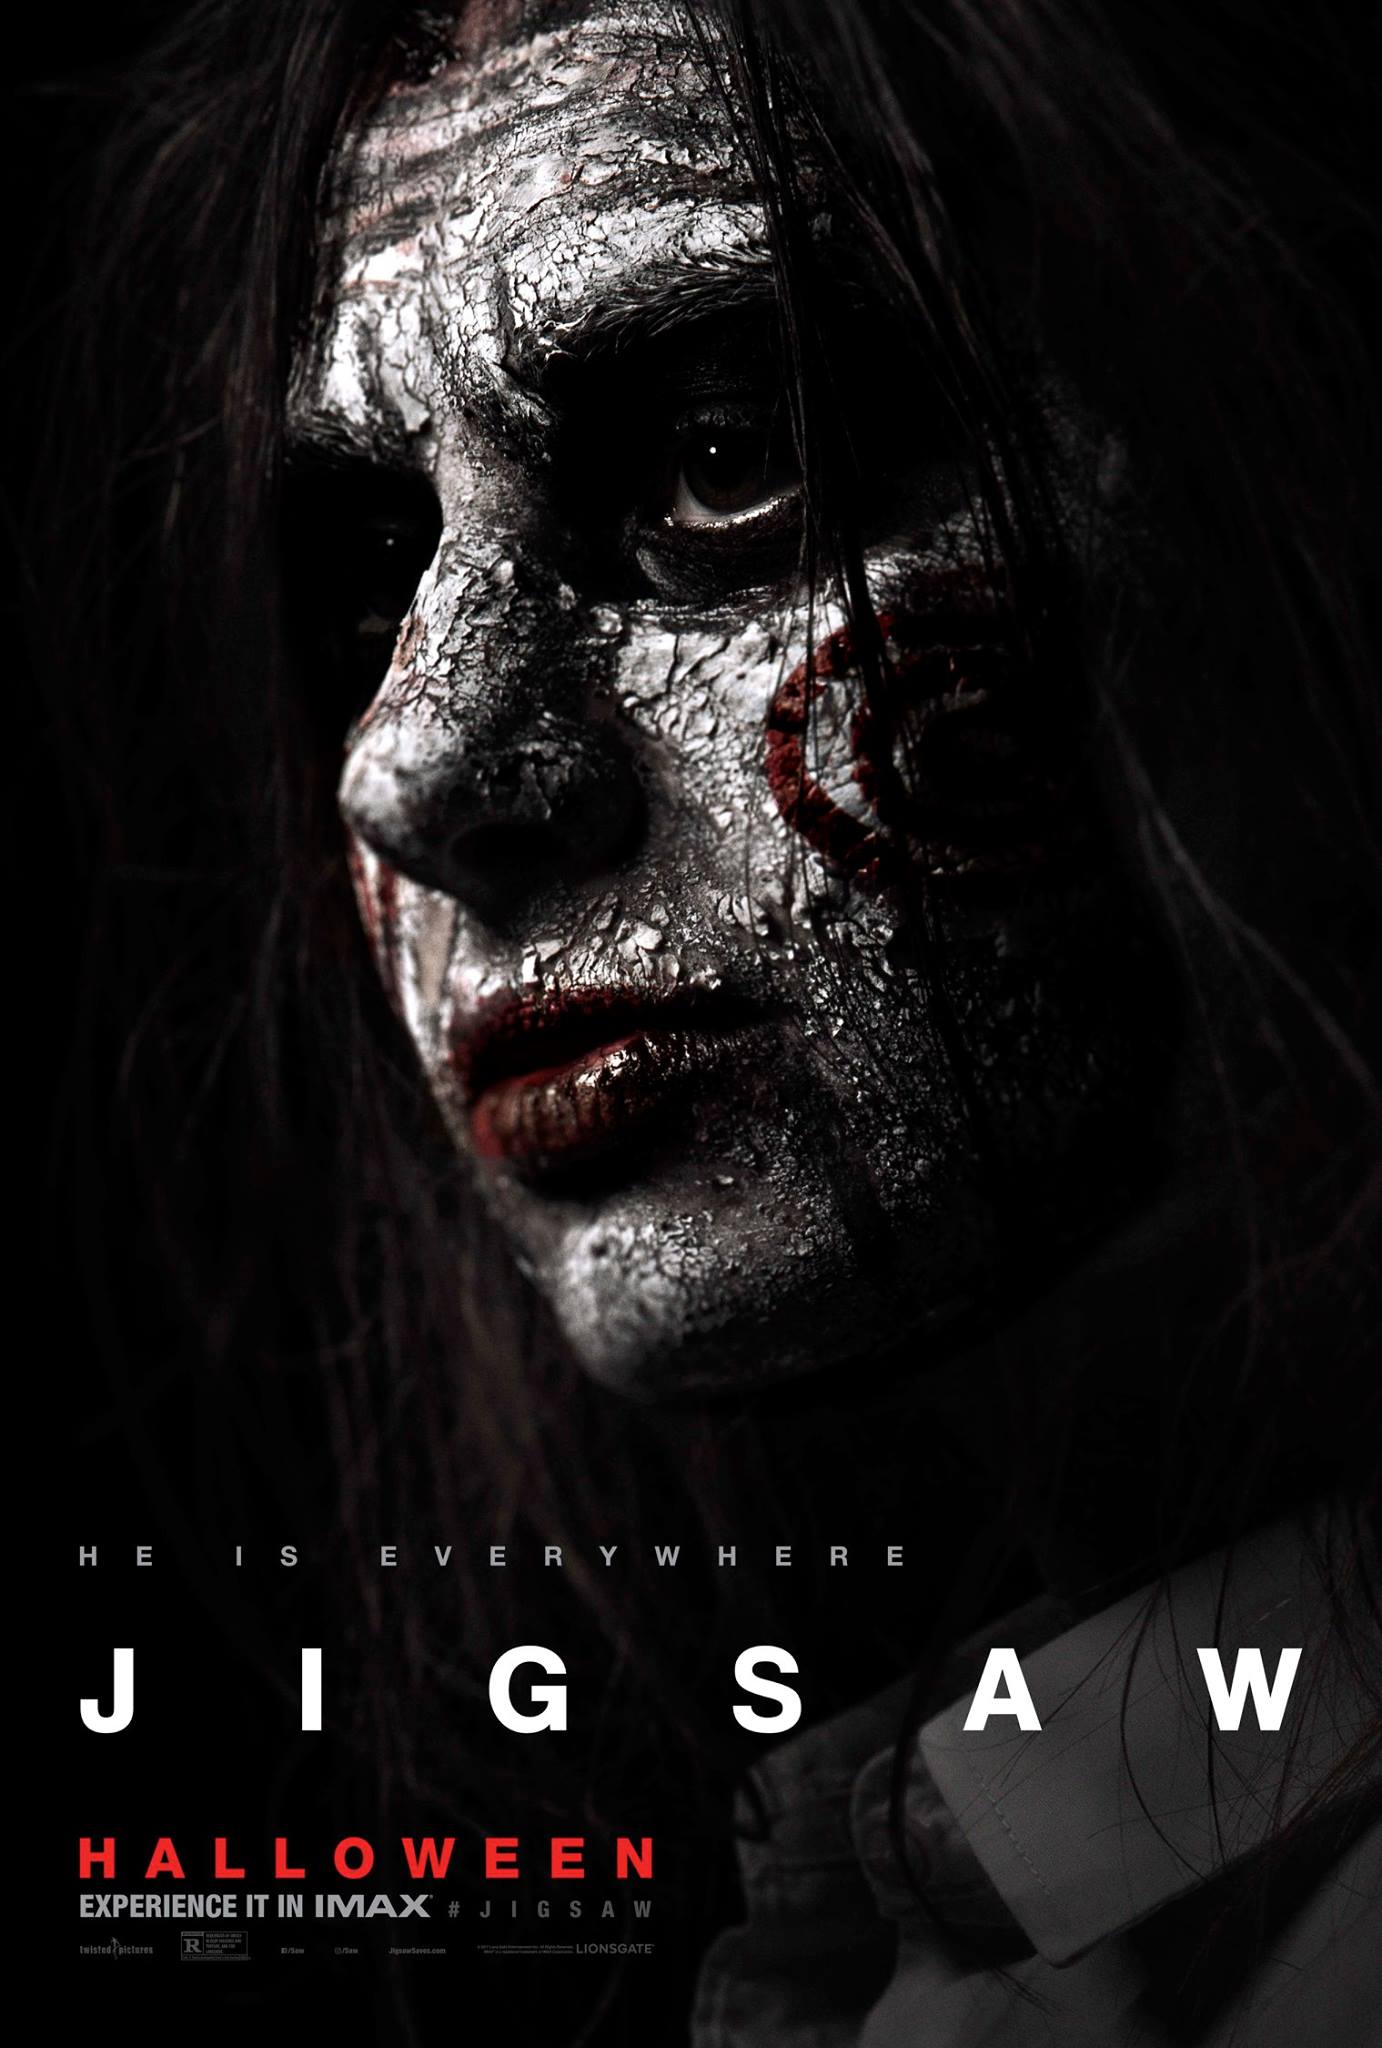 jigsaw character poster 3